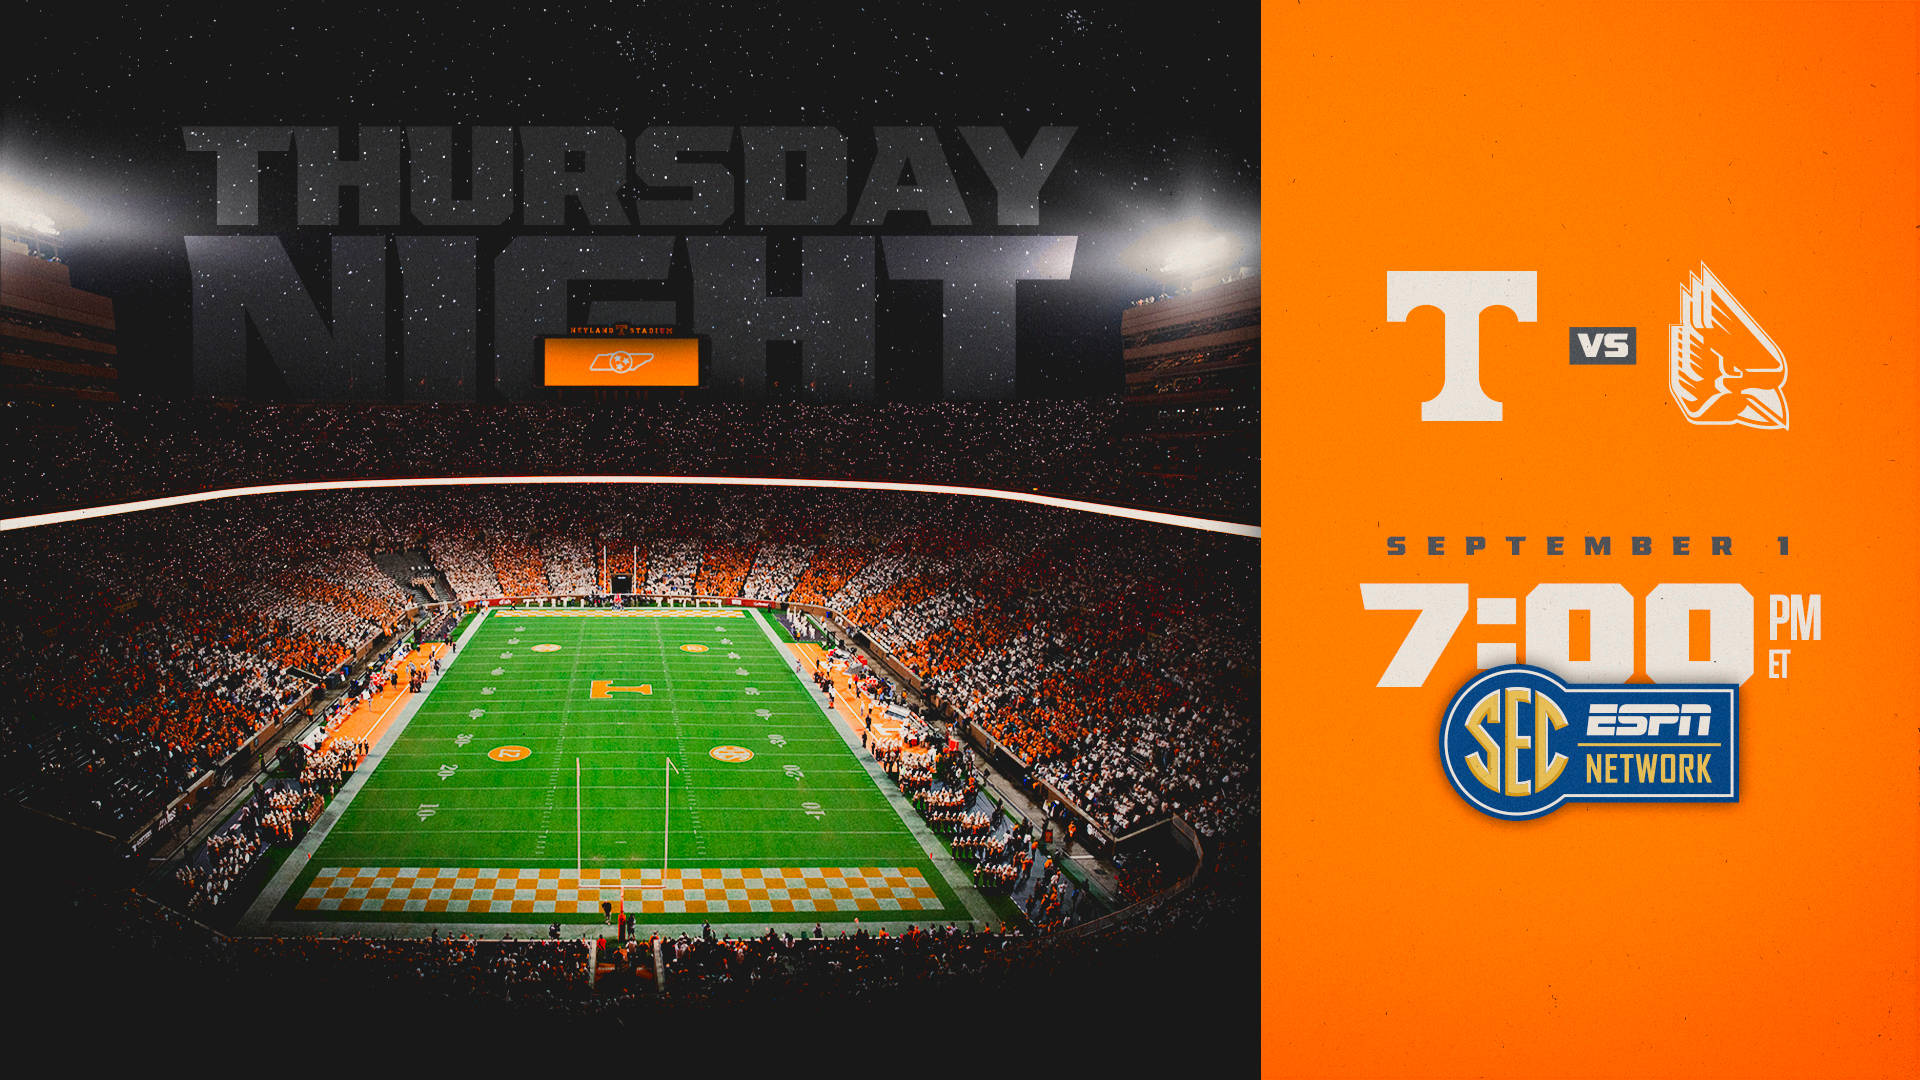 University Of Tennessee Football Game Poster Wallpaper